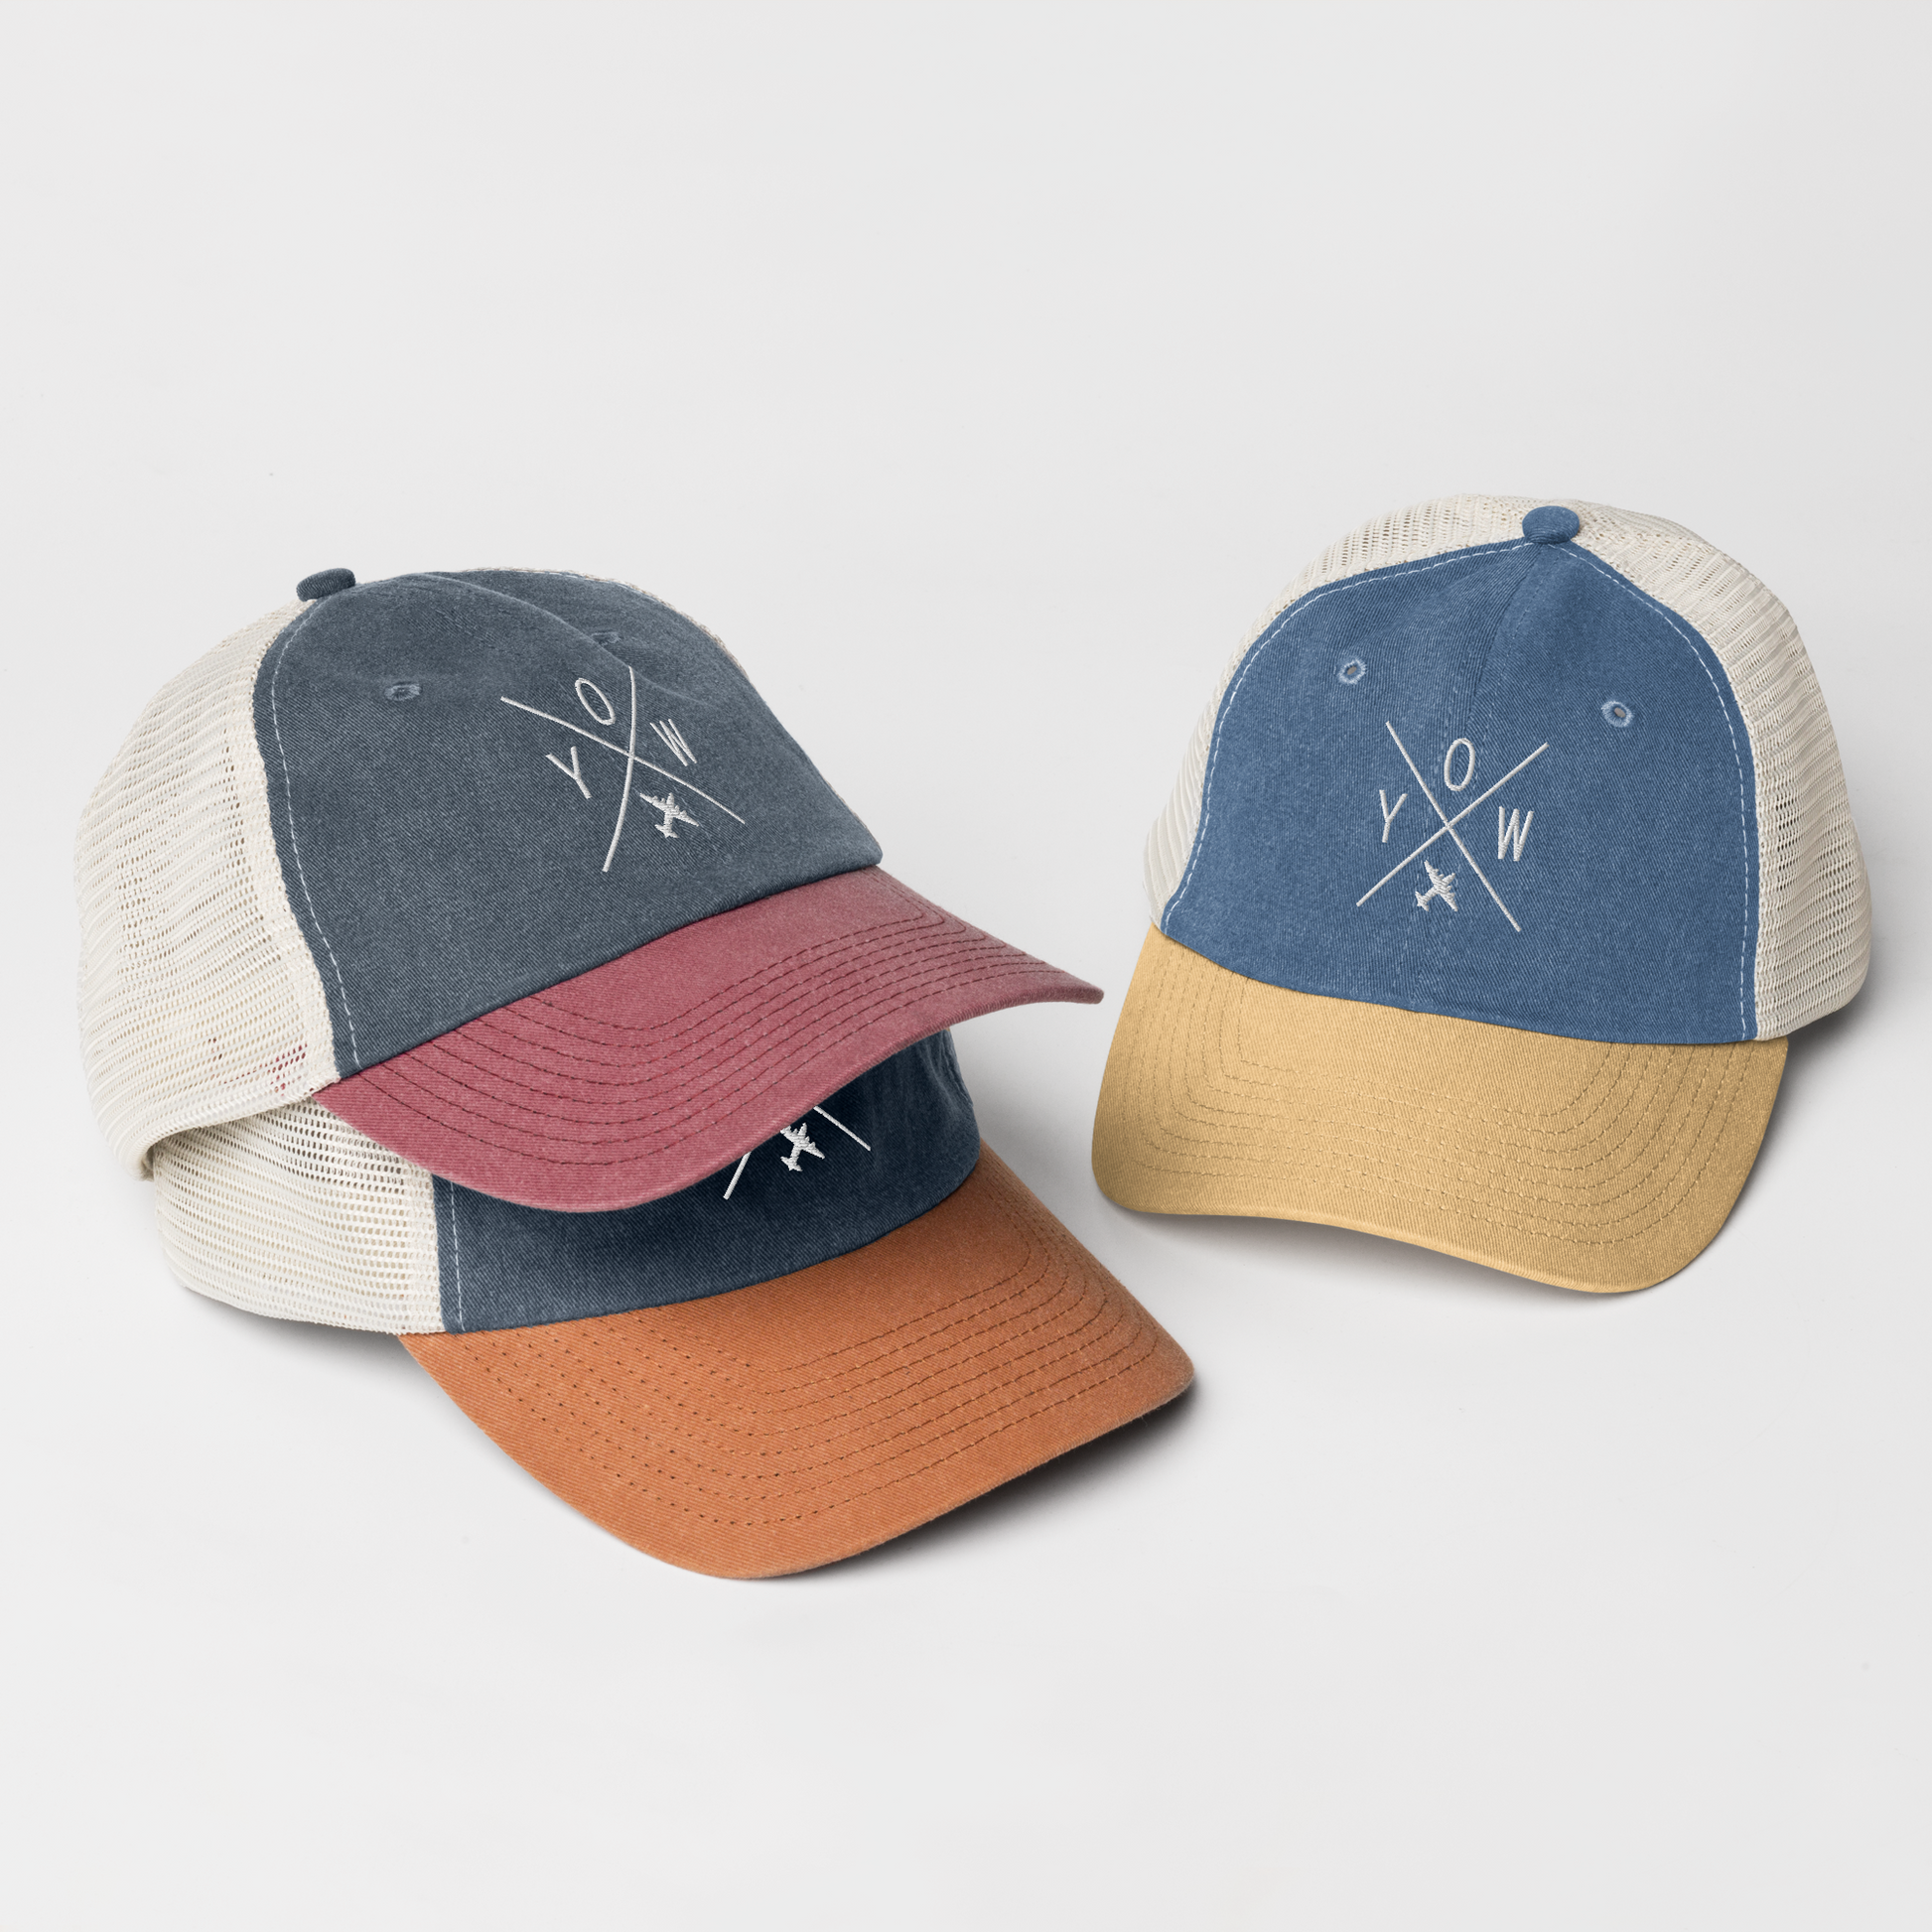 YHM Designs - YOW Ottawa Pigment-Dyed Trucker Cap - Crossed-X Design with Airport Code and Vintage Propliner - White Embroidery - Image 05